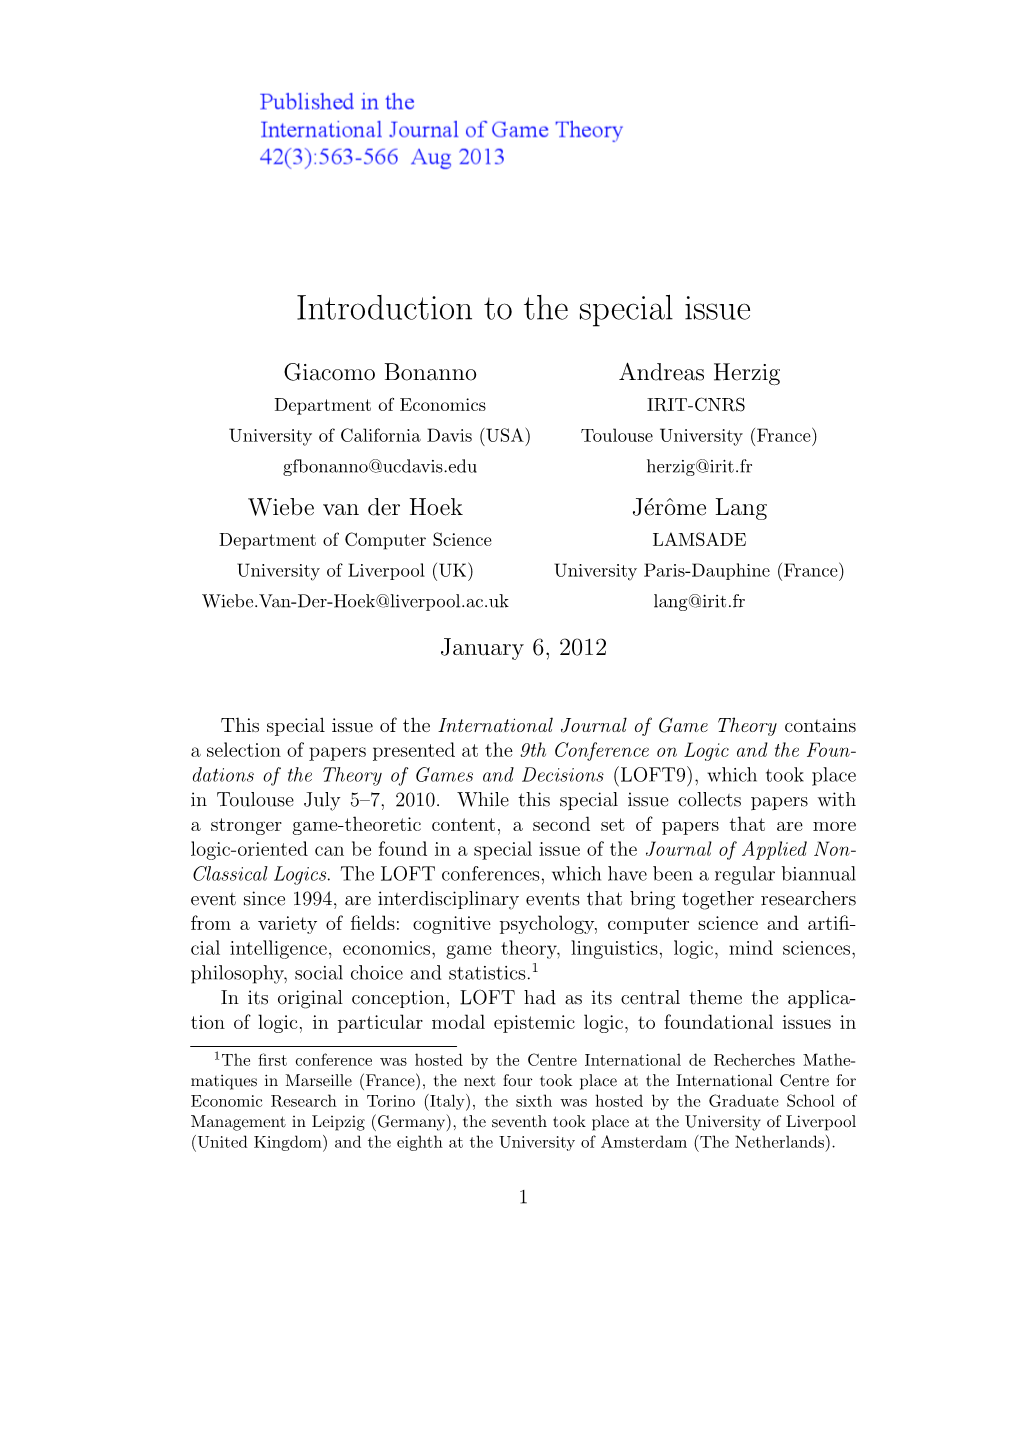 Introduction to the Special Issue